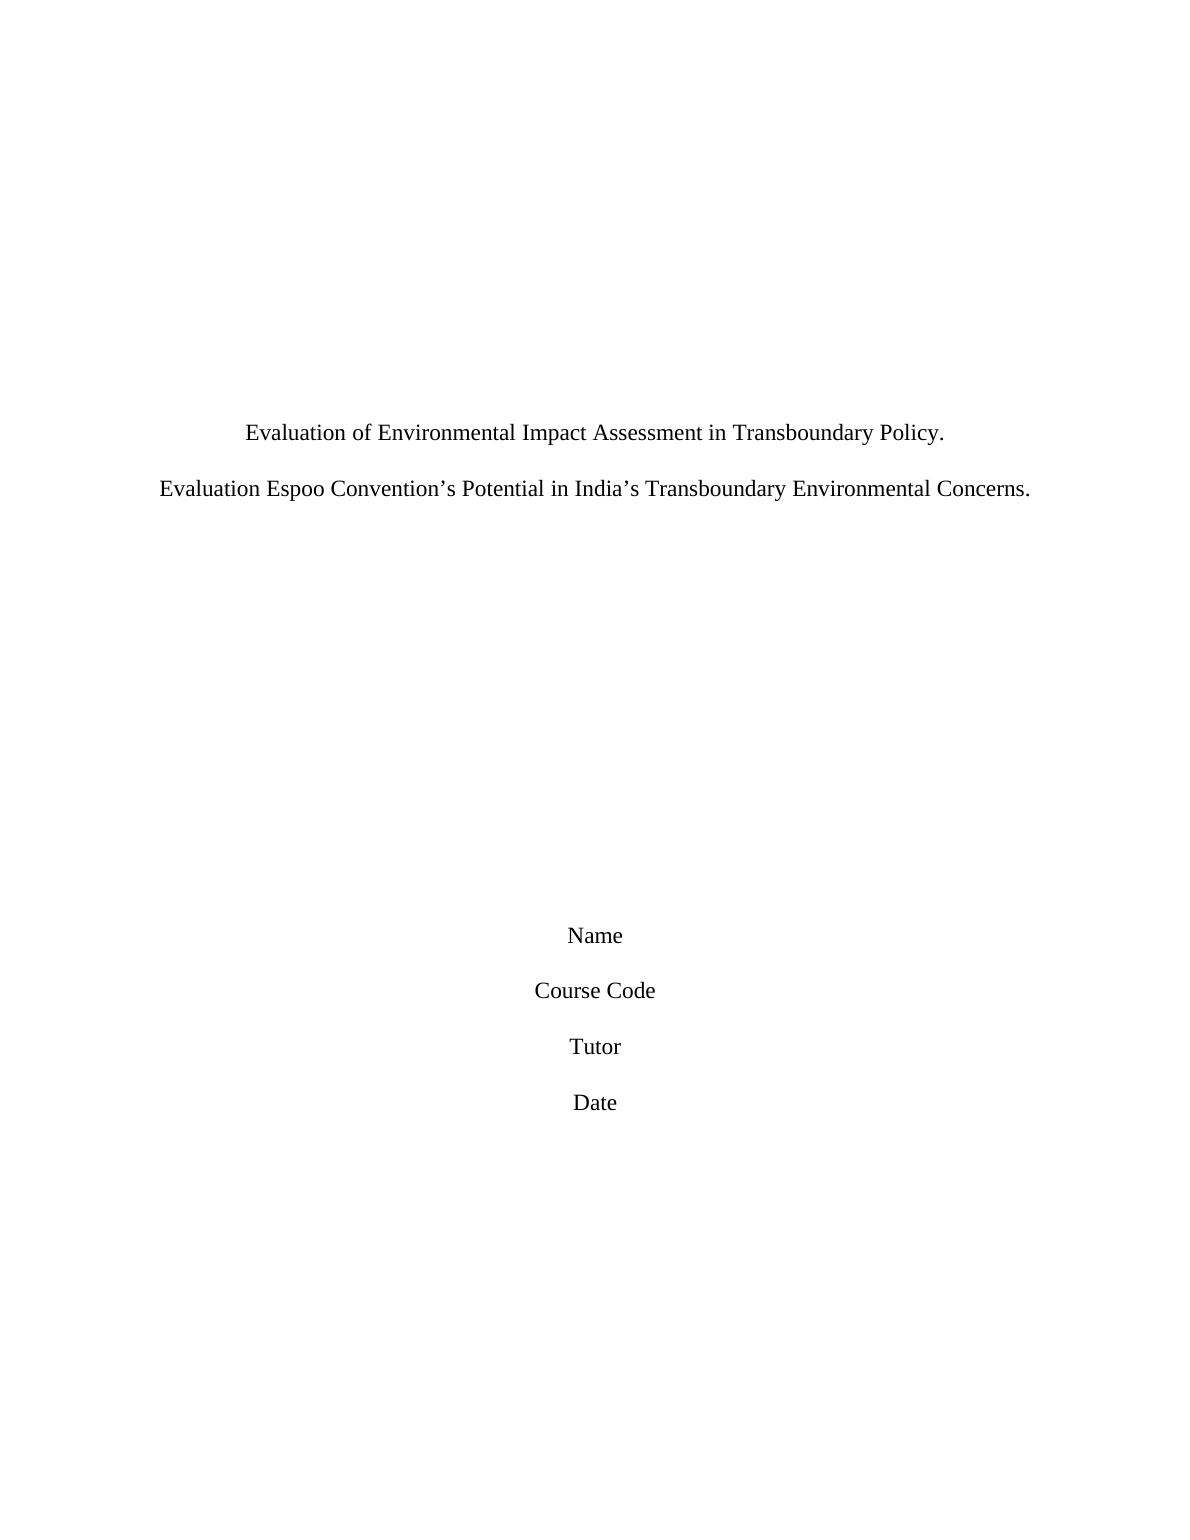 Impact of Environmental Transboundary Policy Assessment 2022_1